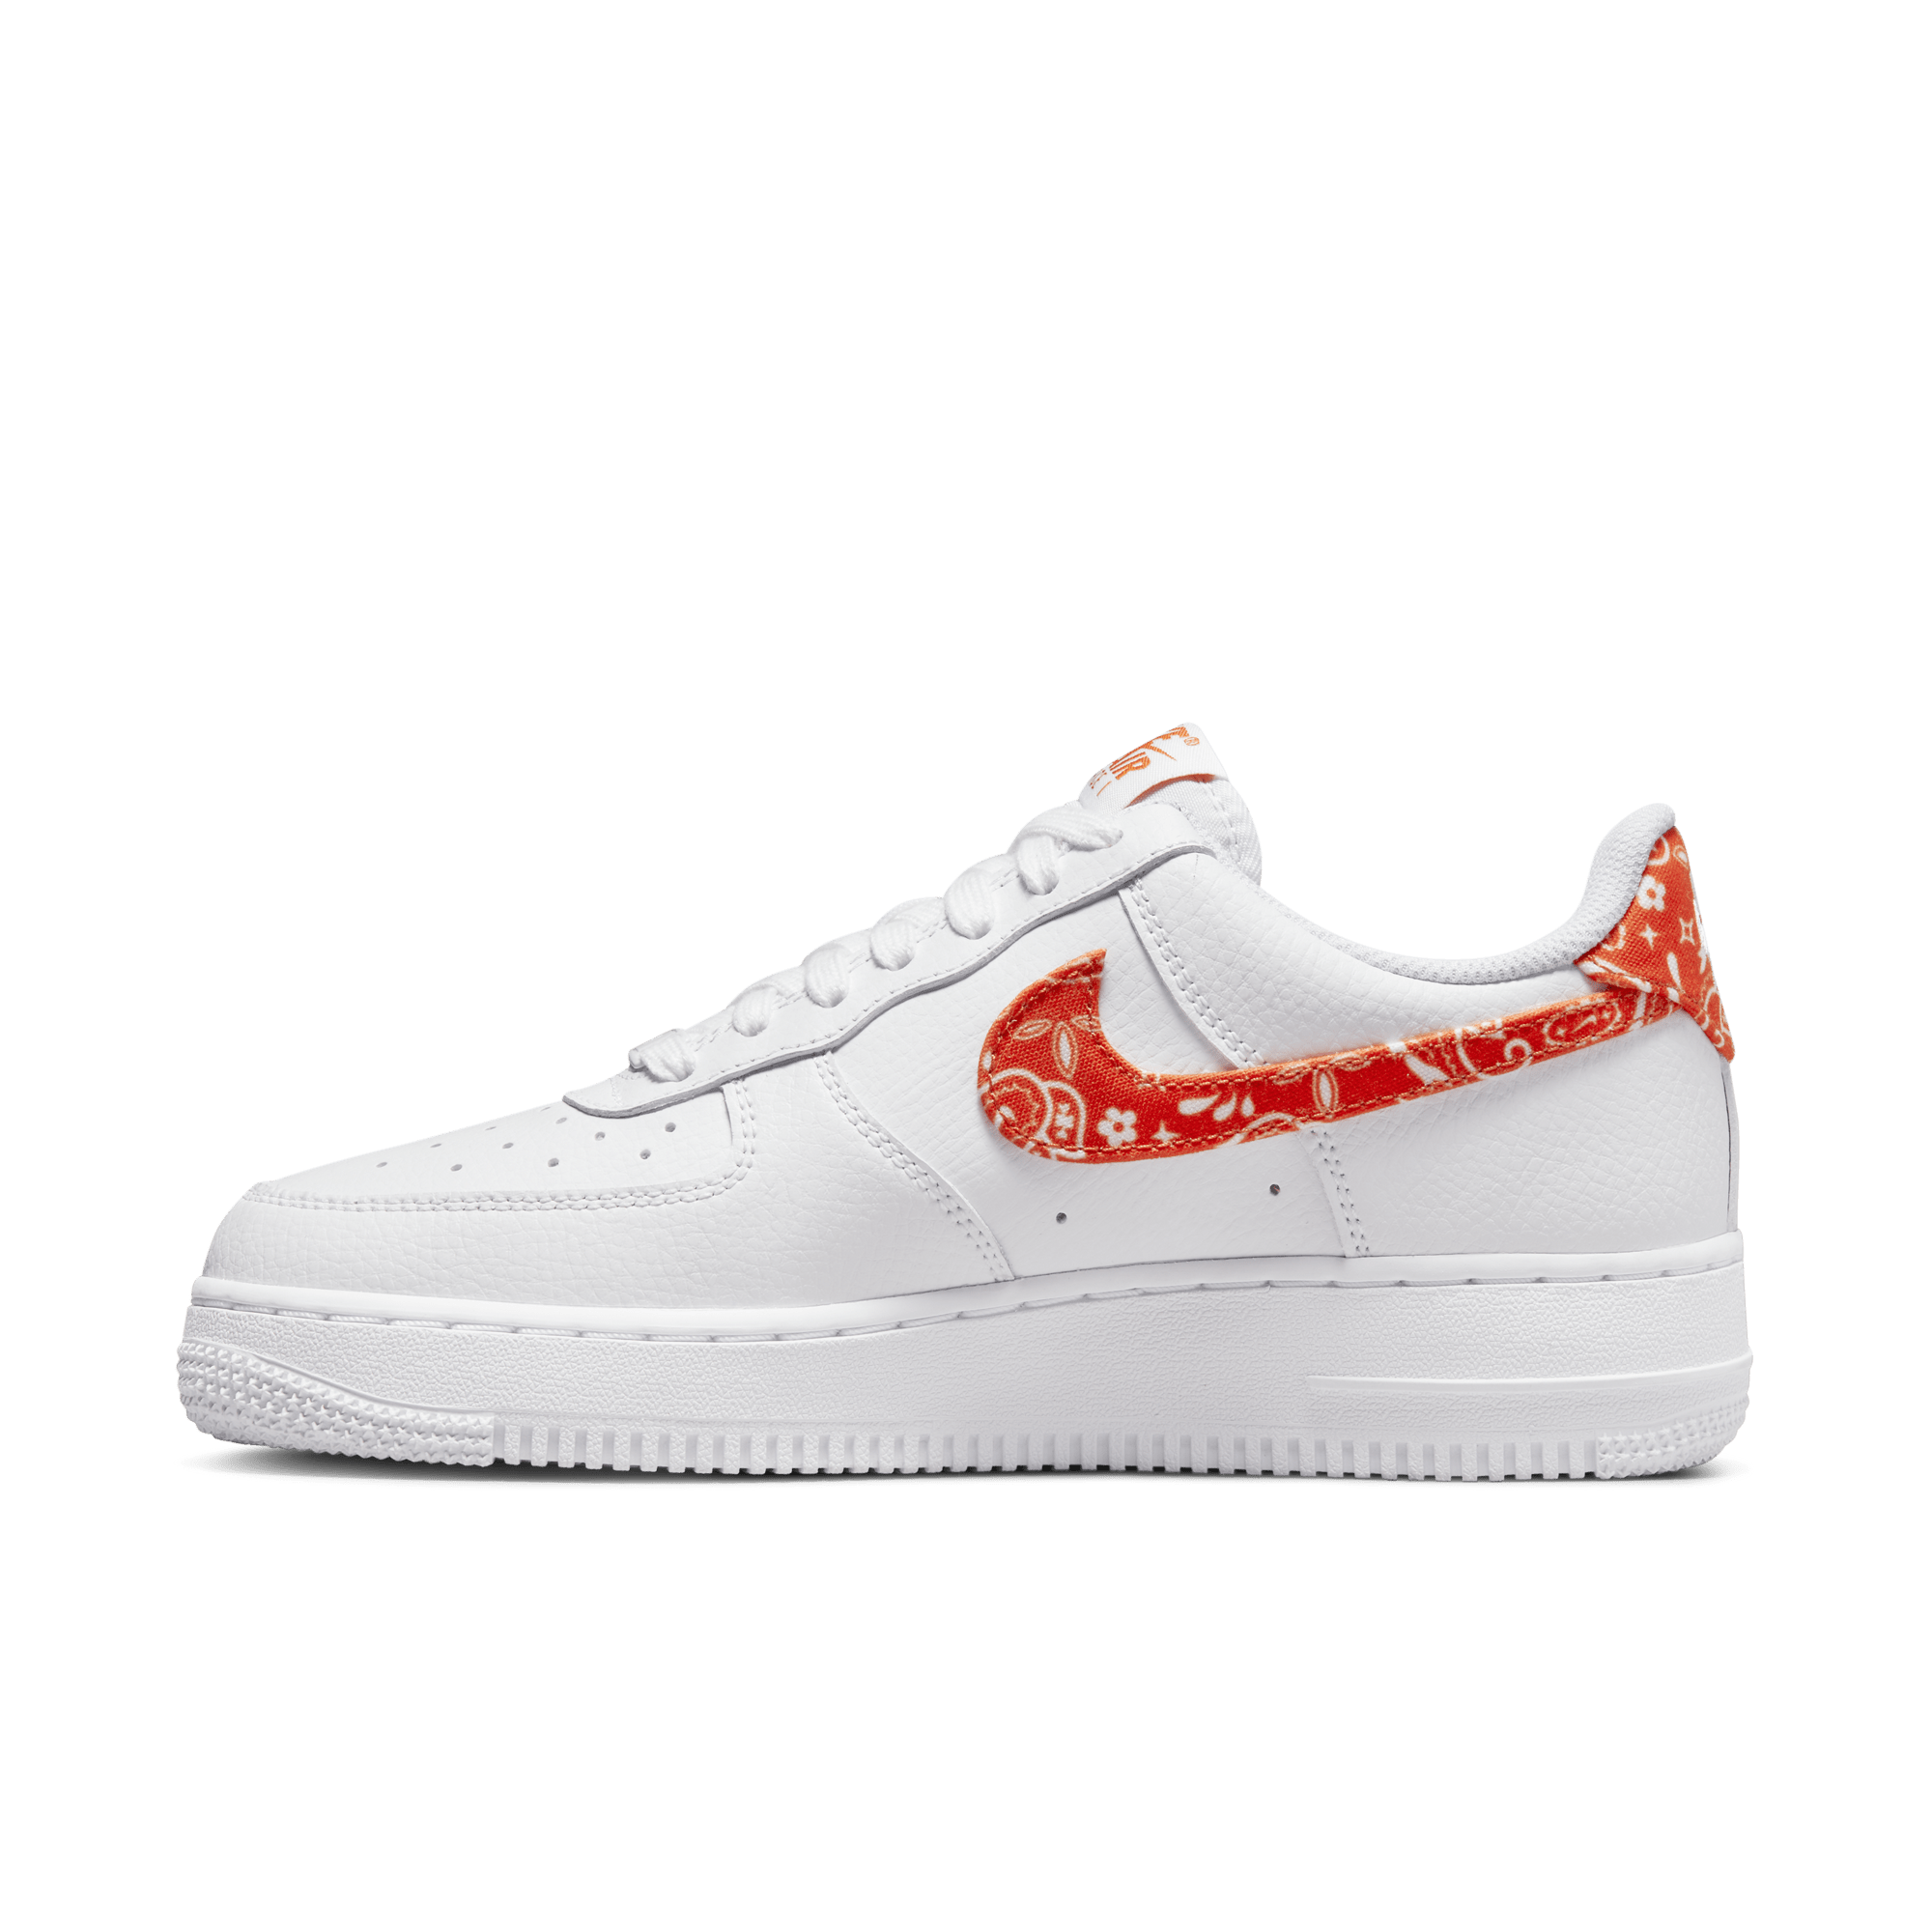 Noroeste Mago medianoche Nike Air Force 1 '07 - Women's - GBNY